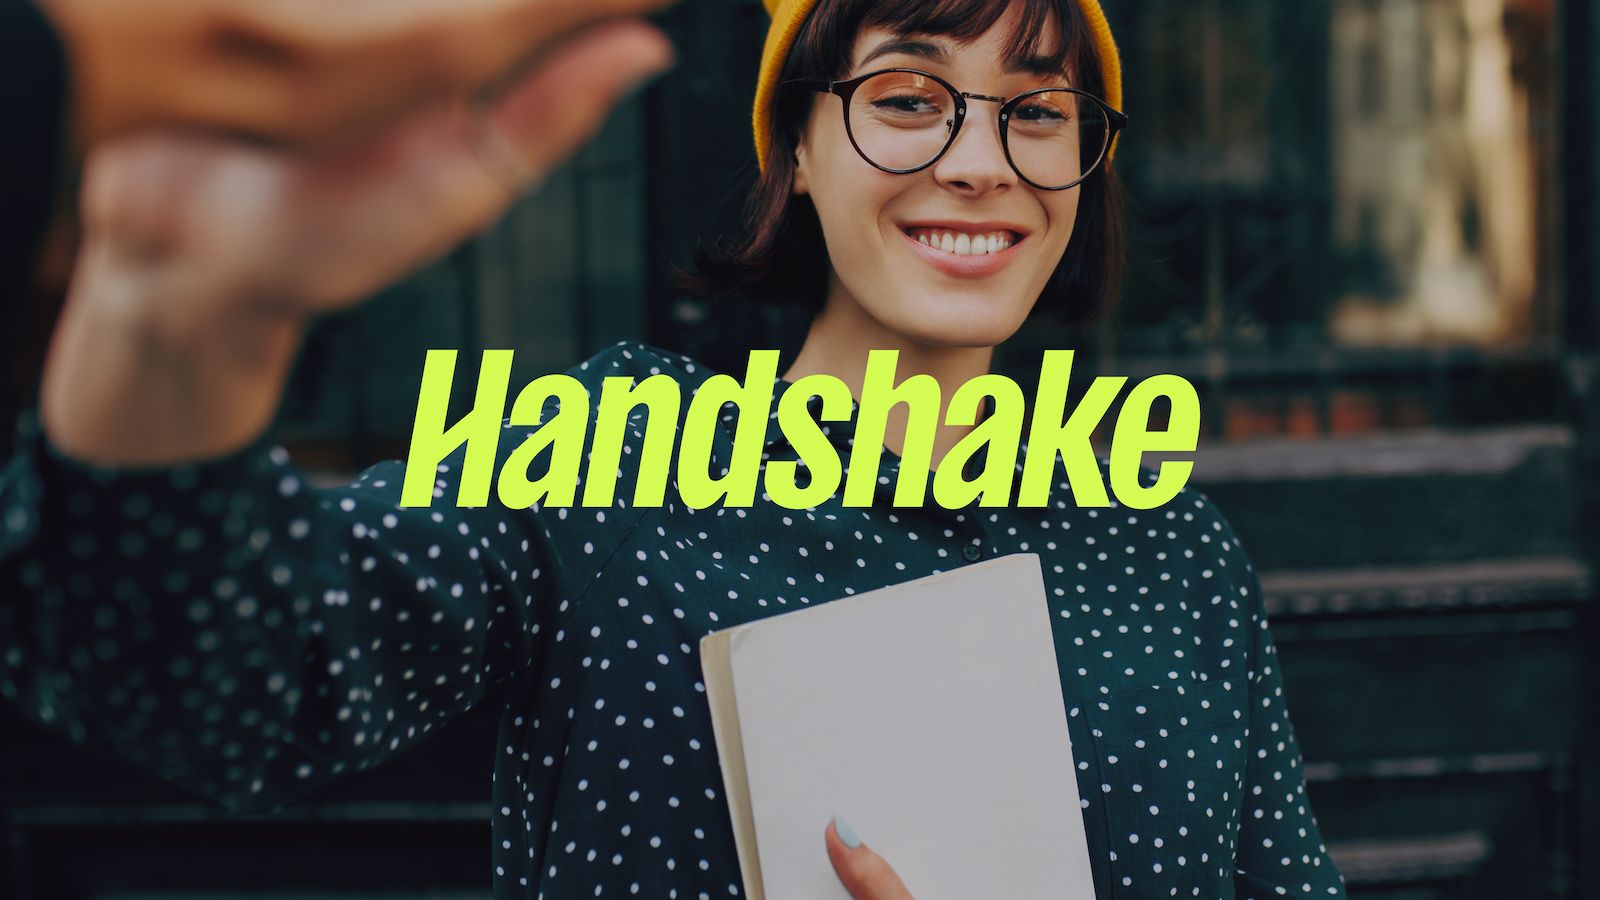 Handshake logo and photo of a young woman with a notebook shaking hands with a person off-camera